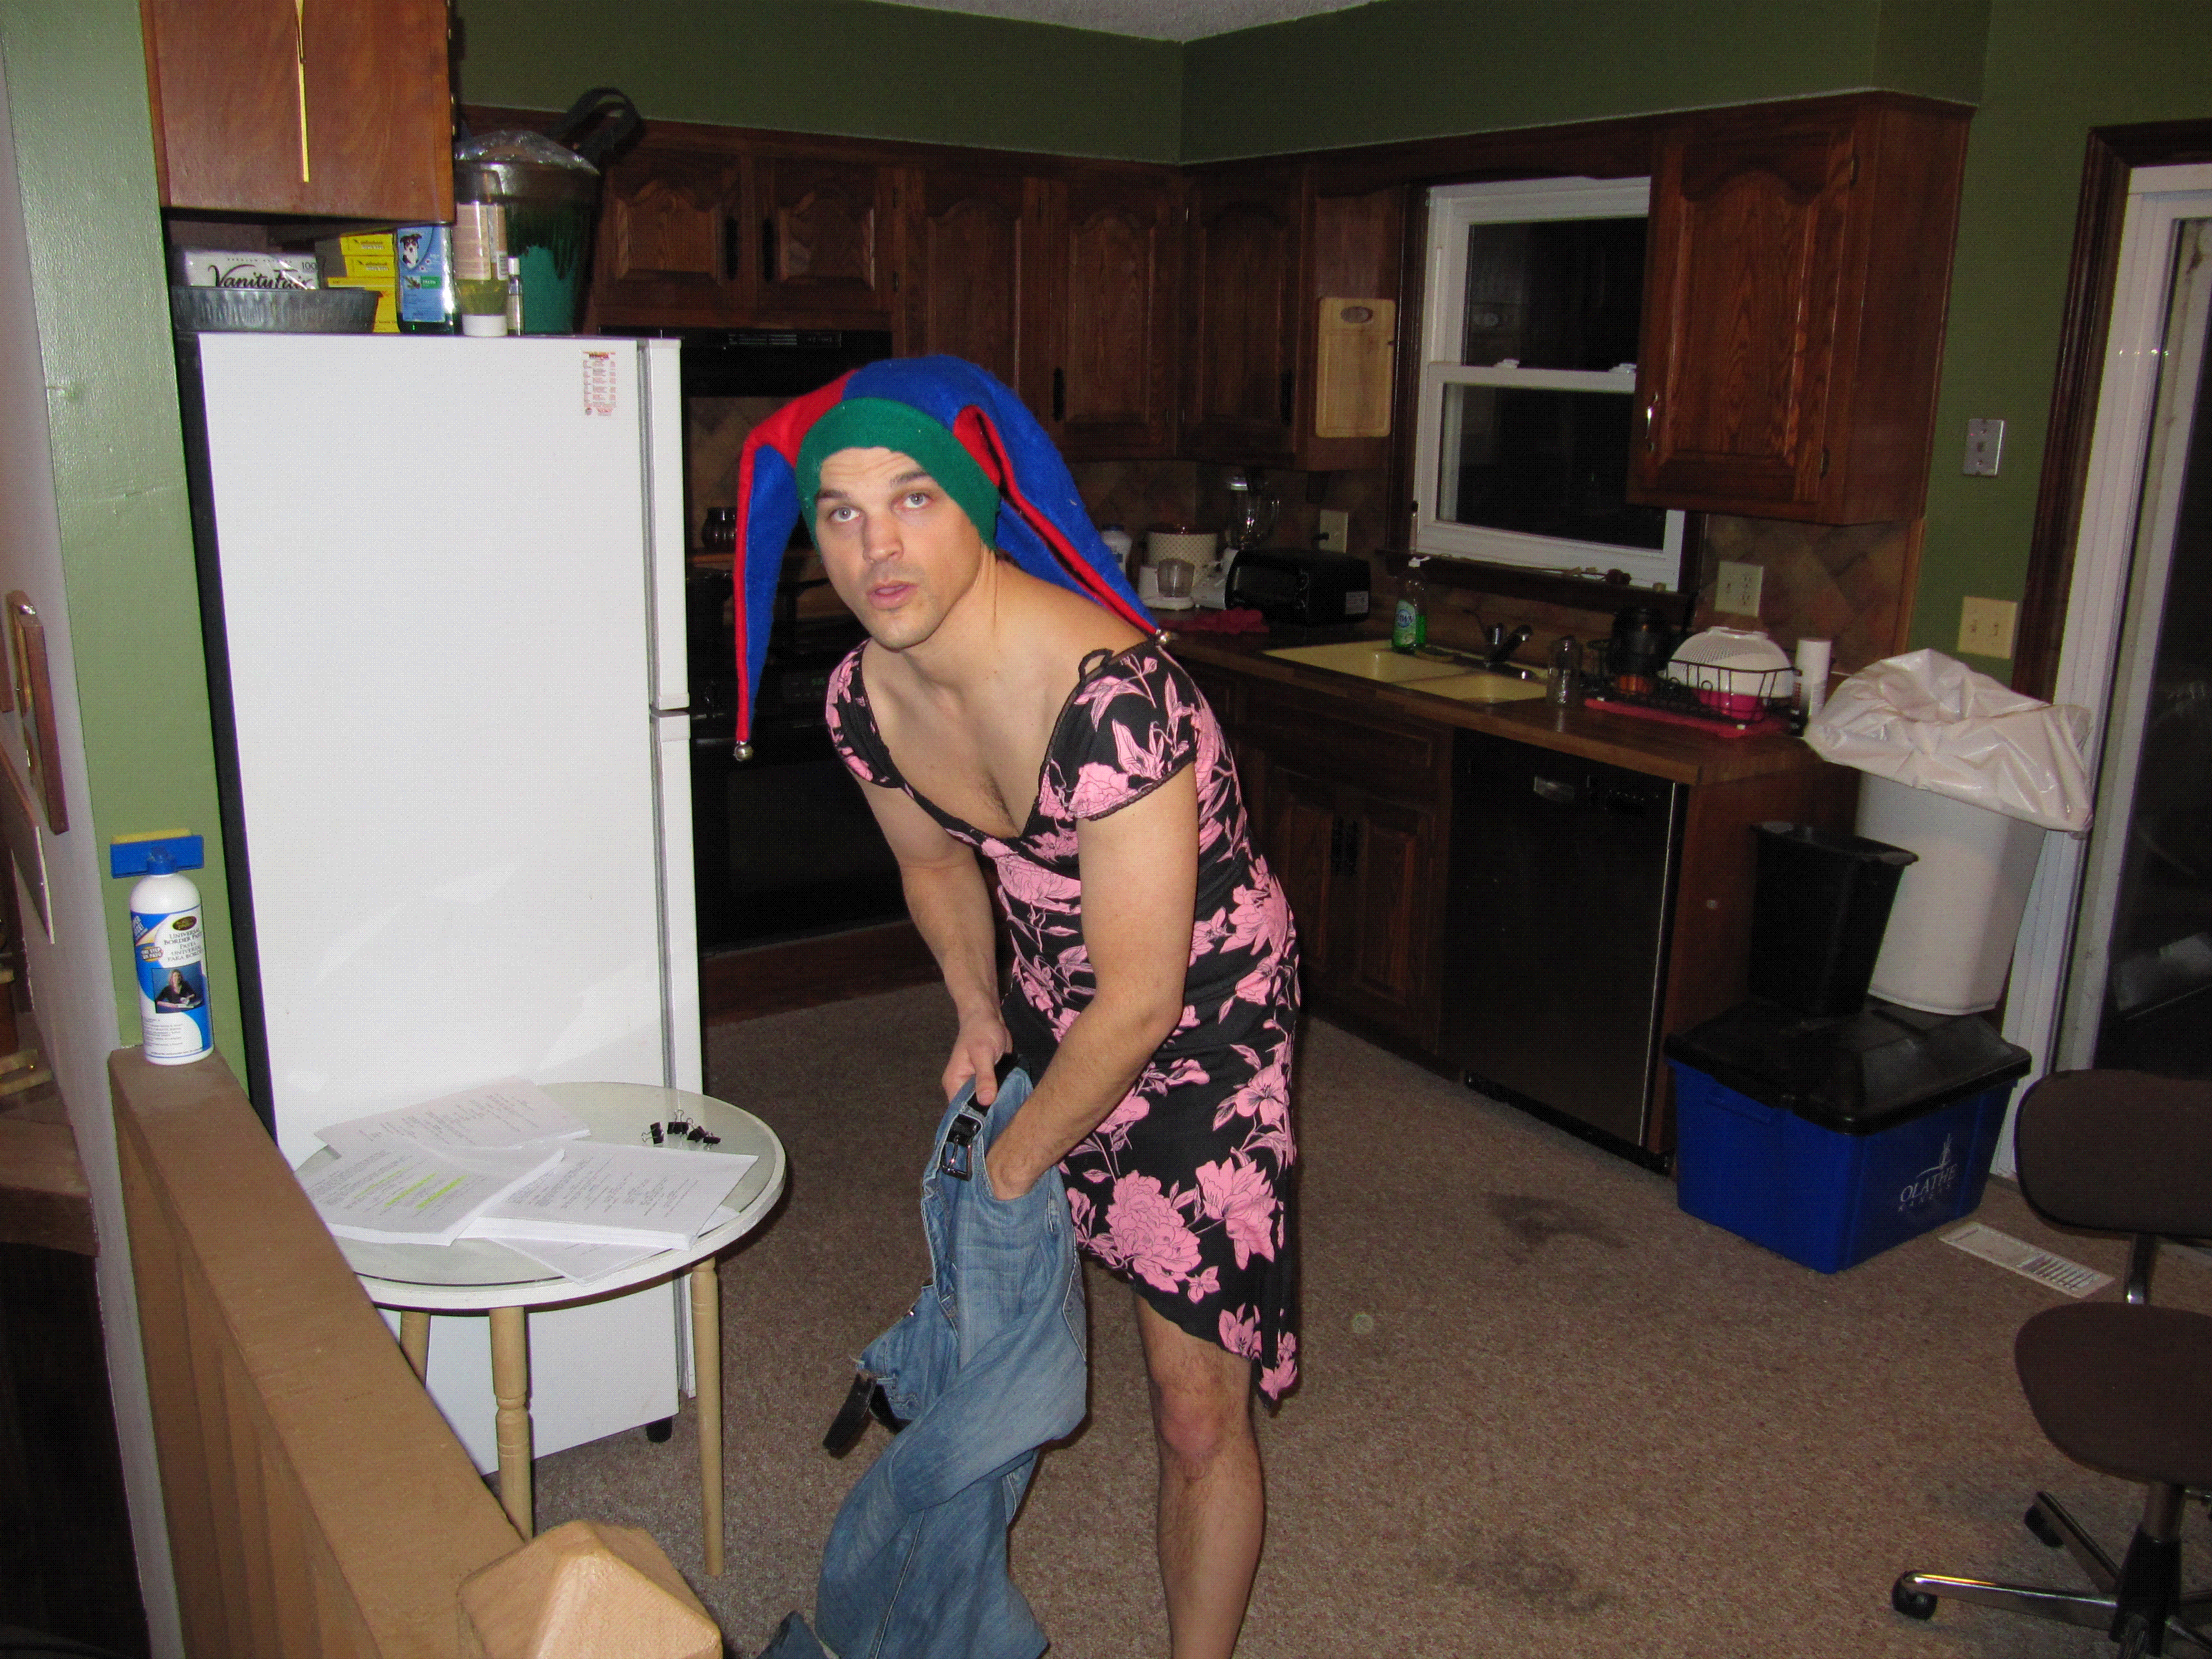 So, my friend always leaves his door unlocked and I decided to drop by unannounced. I had my camera with me and was able to sneak up on this shit... now WTF do you say to your friend that you just walked in on in drag???